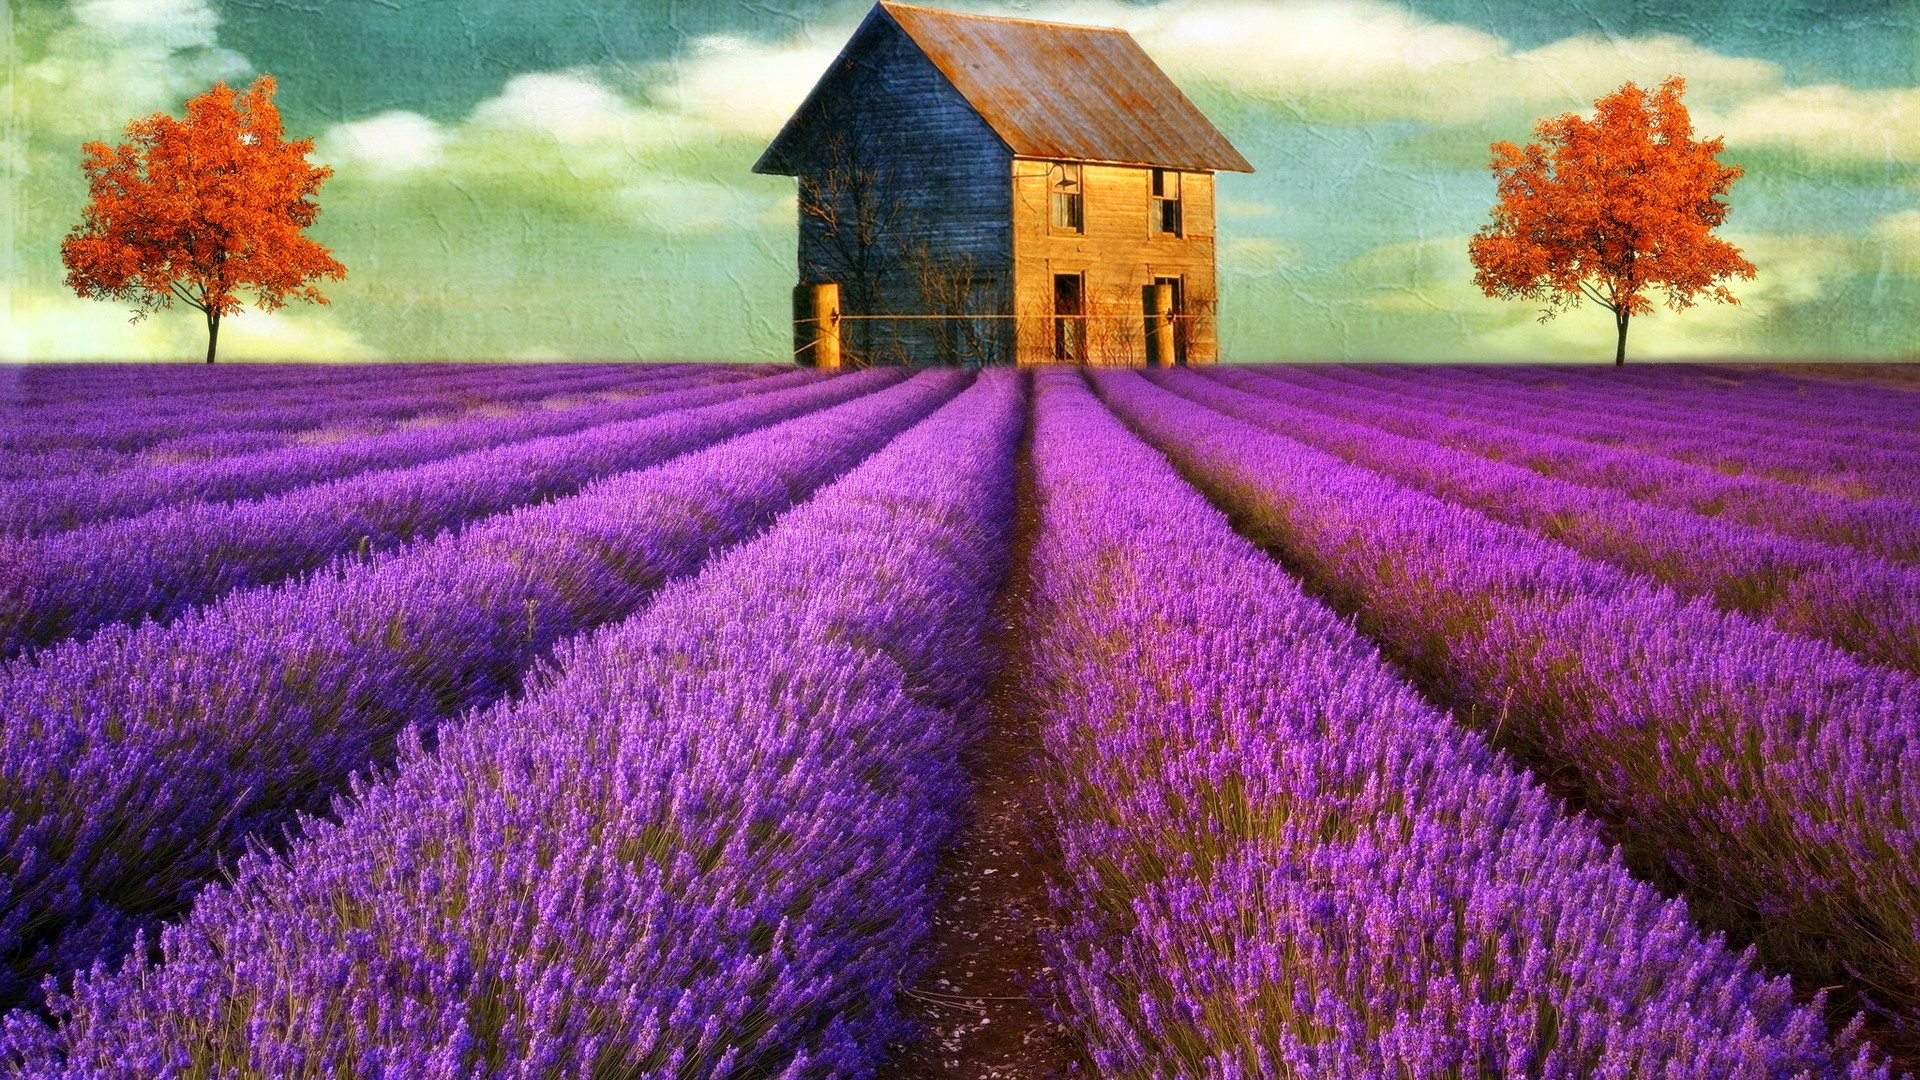 Lavender Field With Cottage - HD Wallpaper 